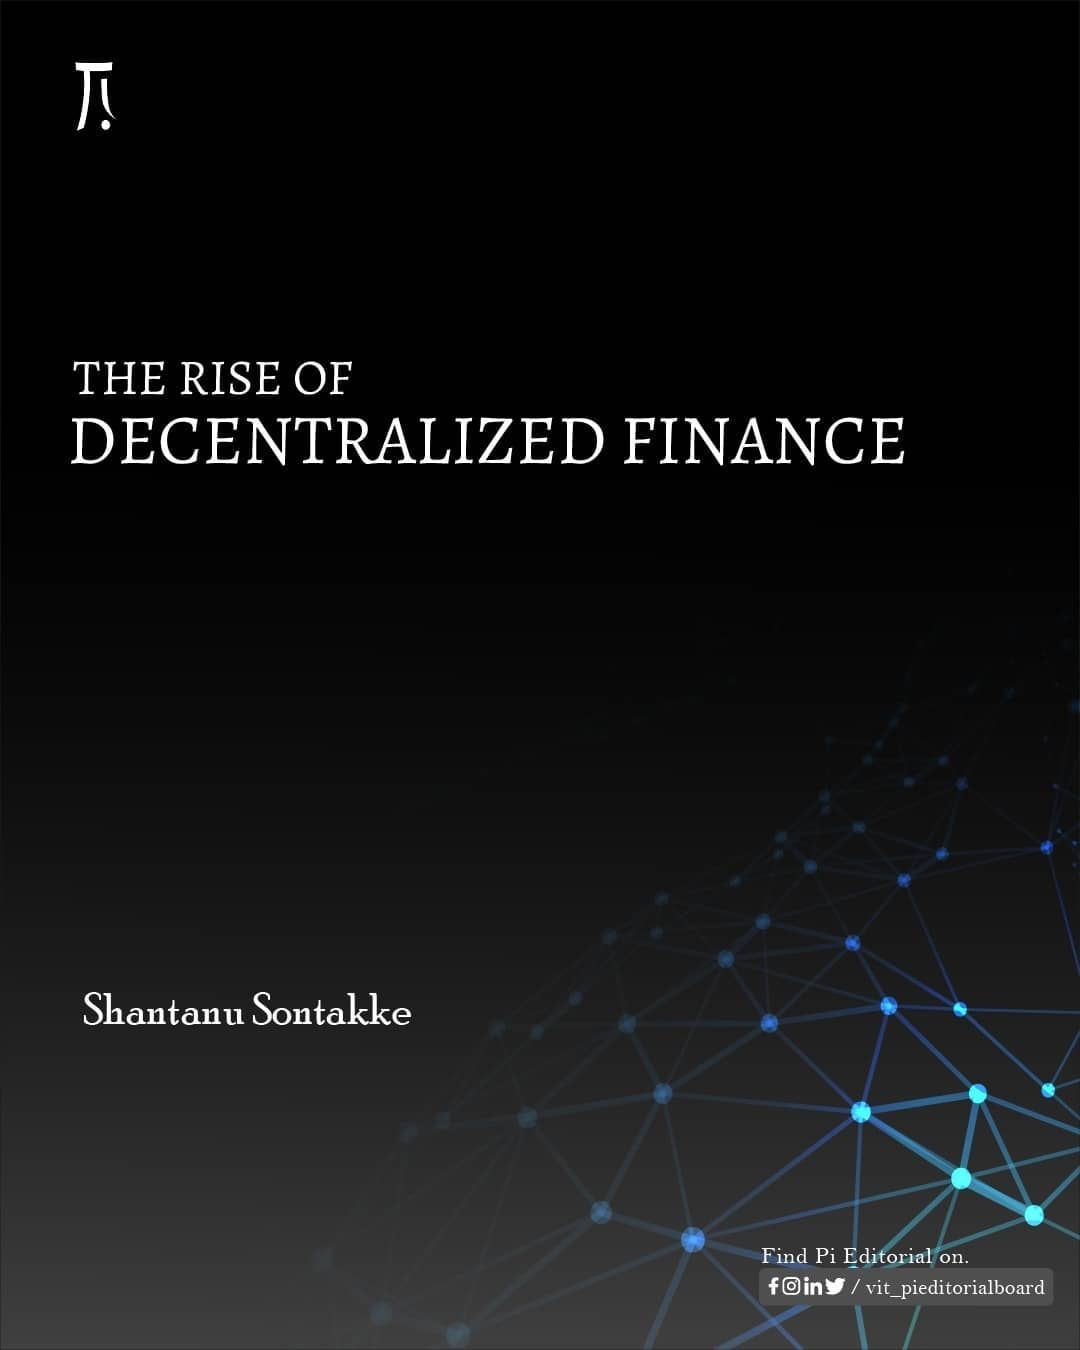 The Rise of Decentralized Finance.